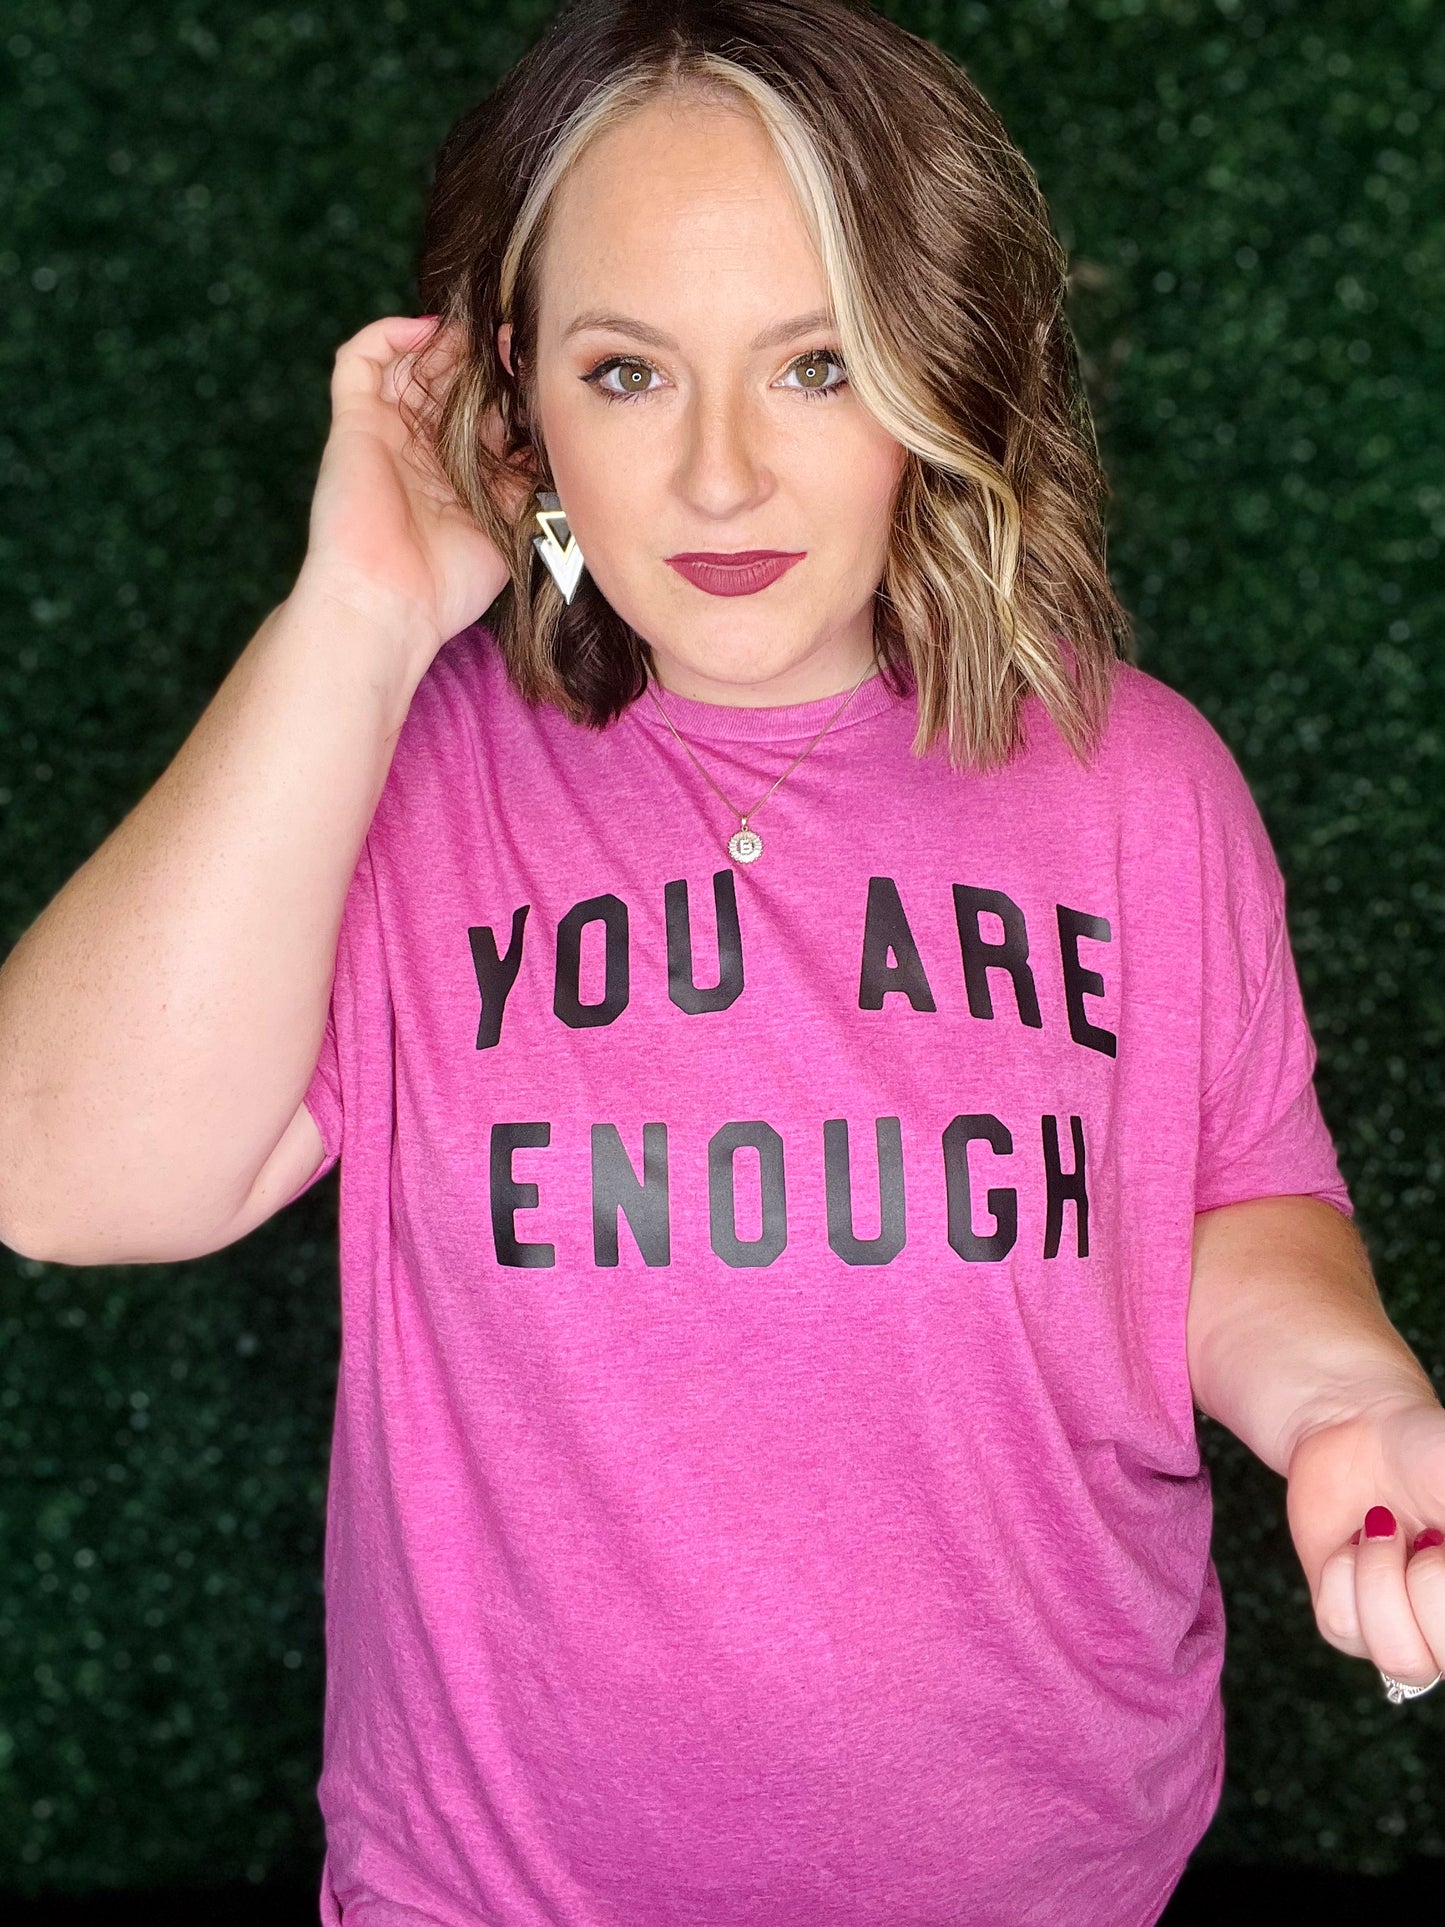 You Are Enough Tee on Berry